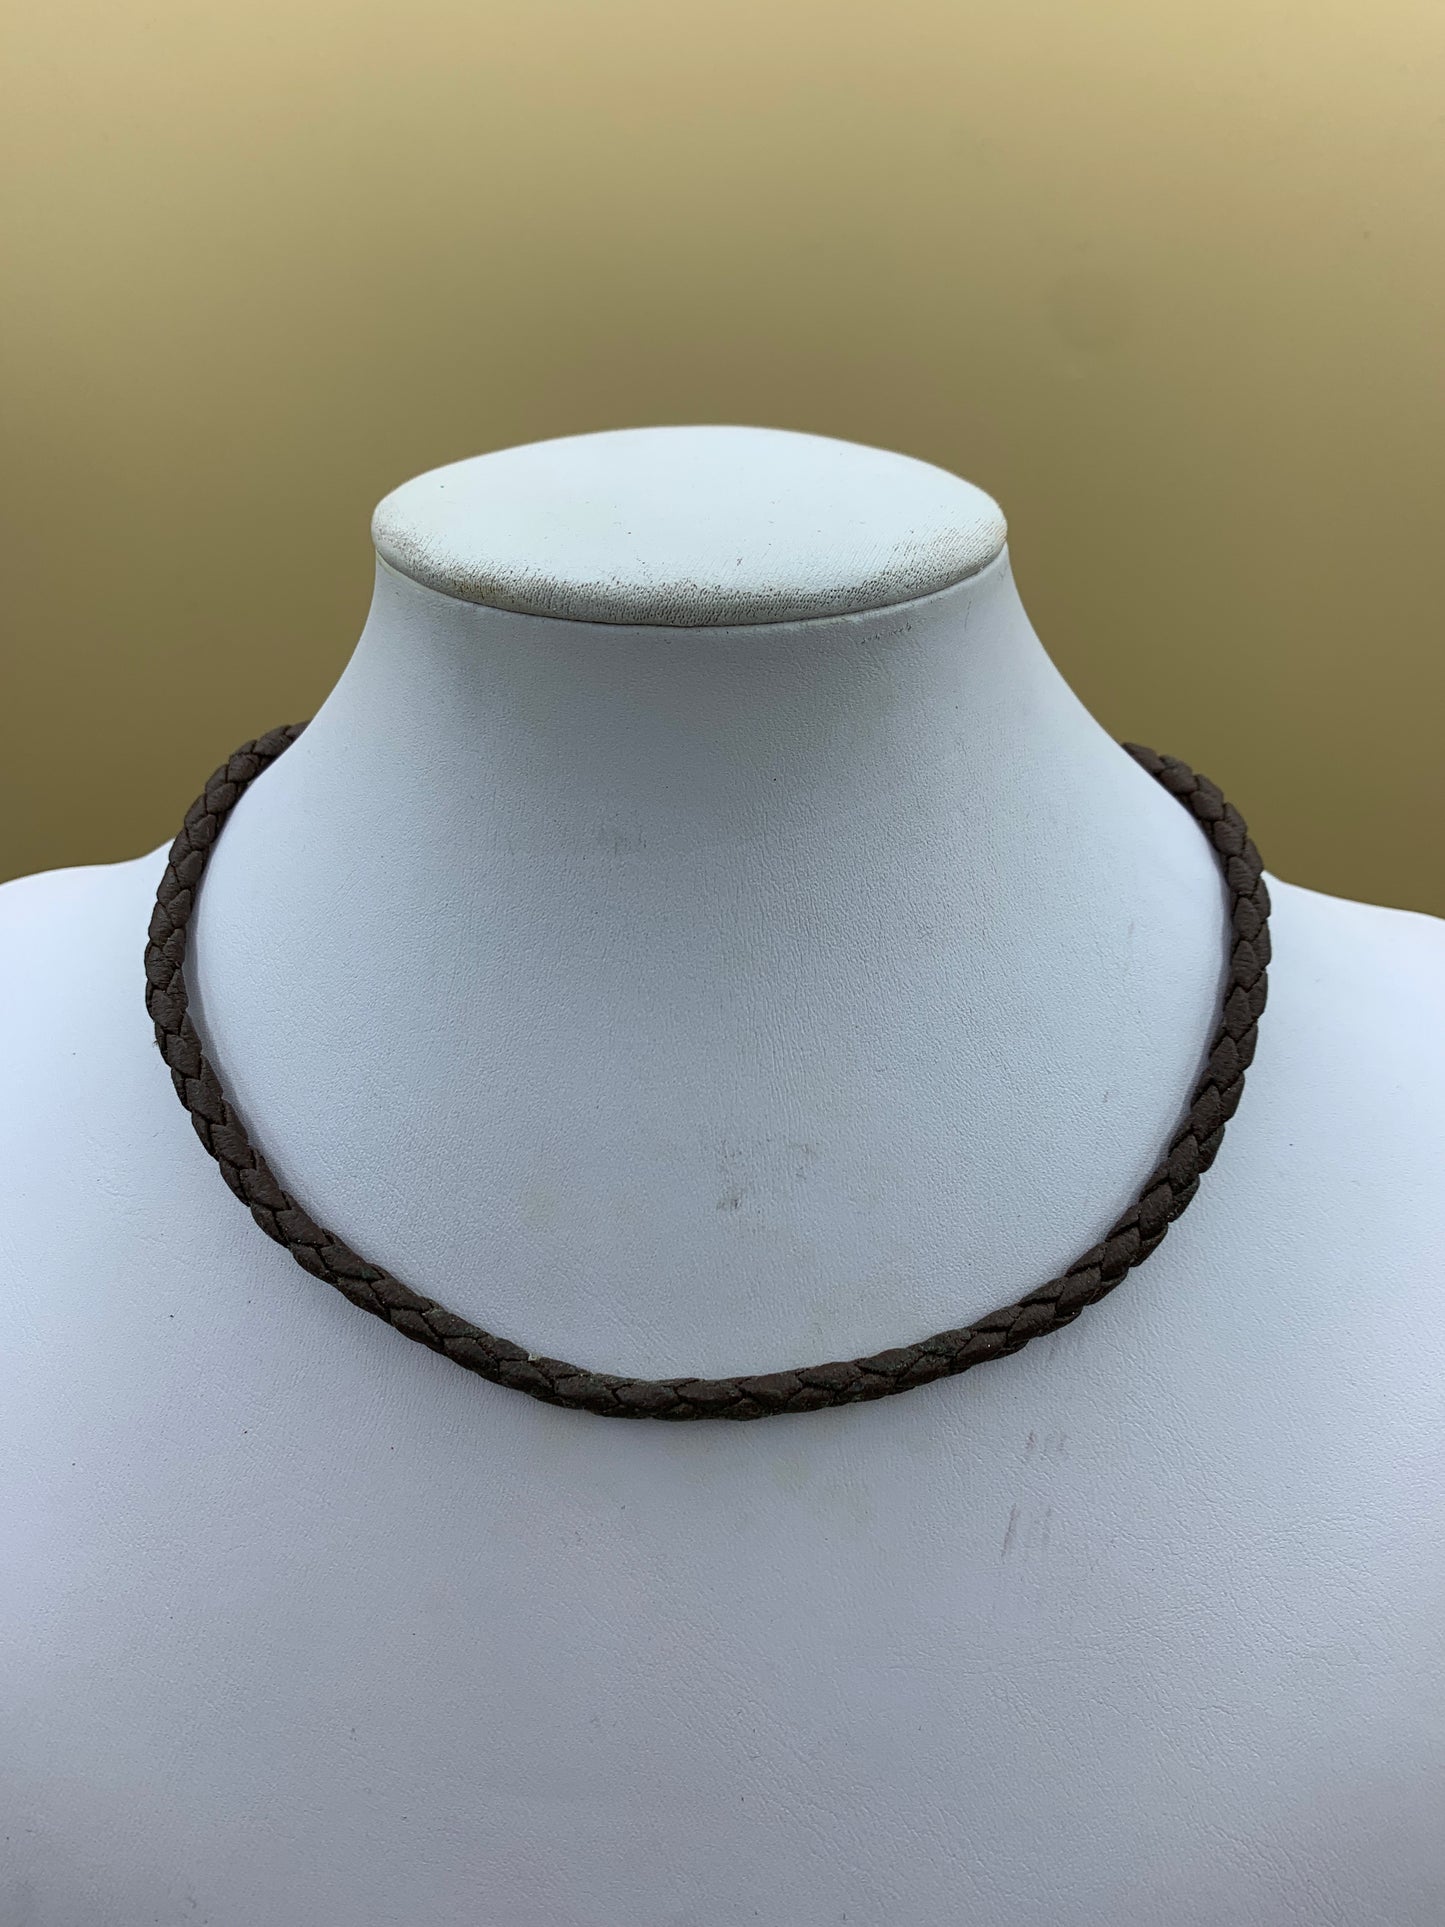 Braided leather choker necklace